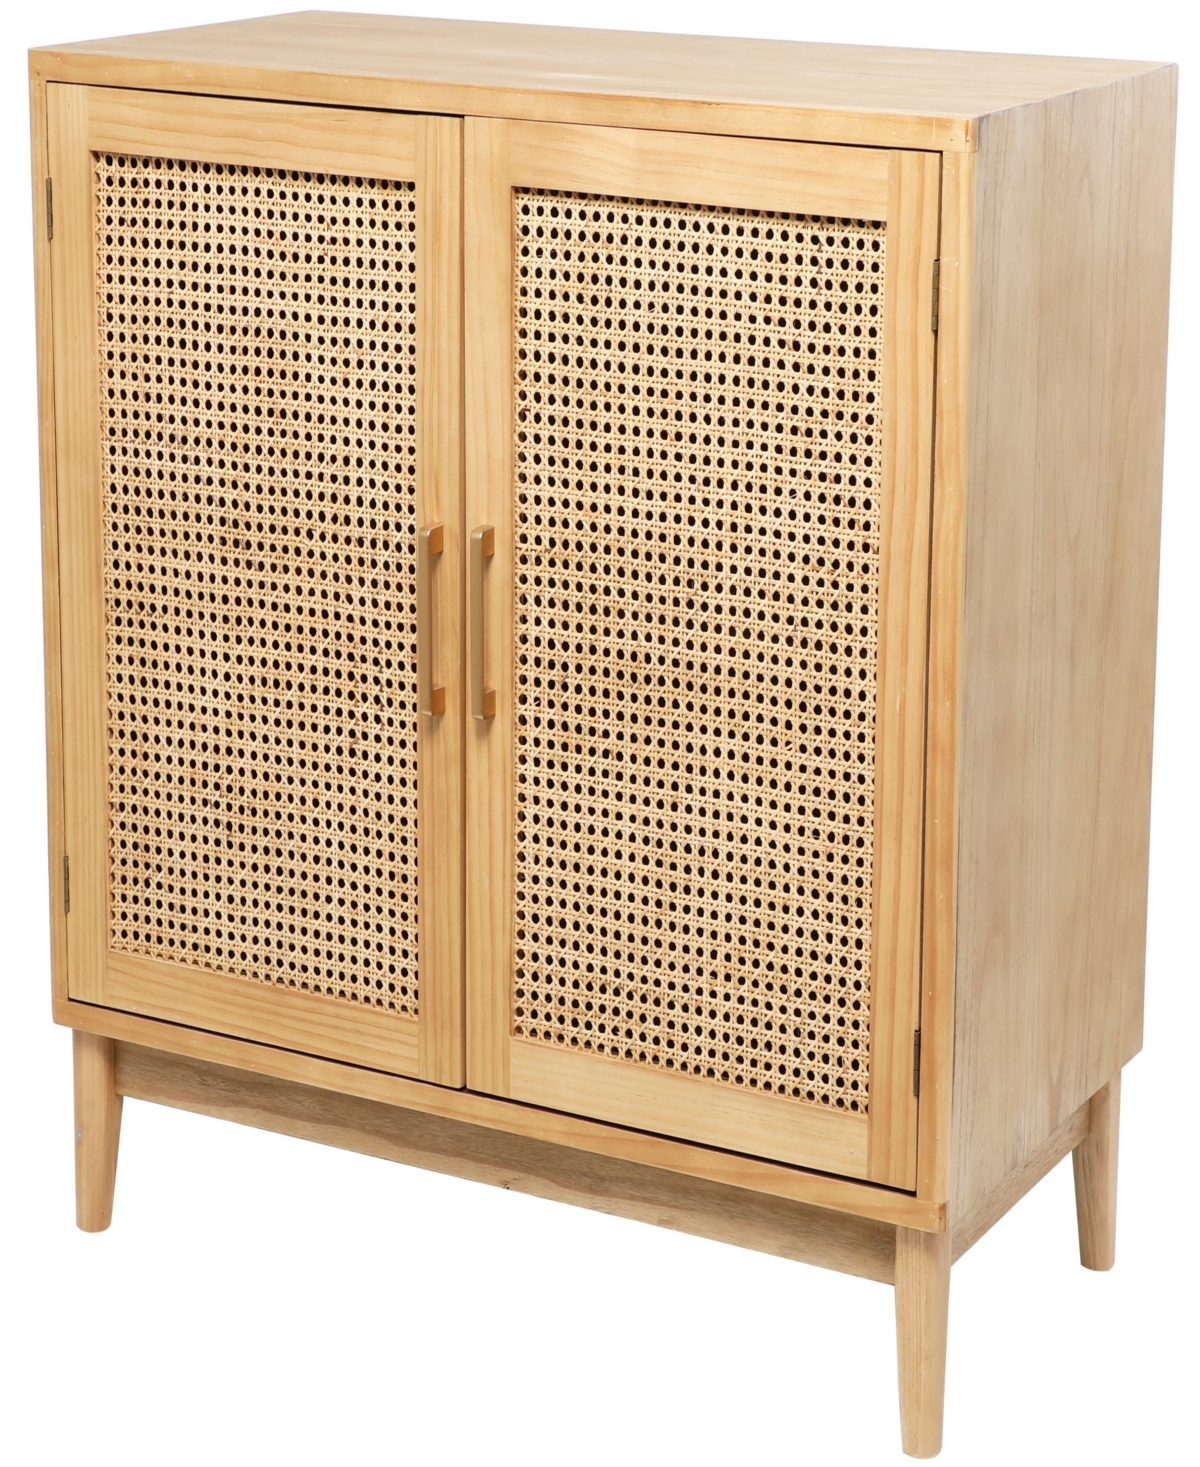 Rosemary Lane 36" Wood 1 Shelf And 2 Door Cabinet With Cane Front Doors And Gold-tone Handles In Light Brown